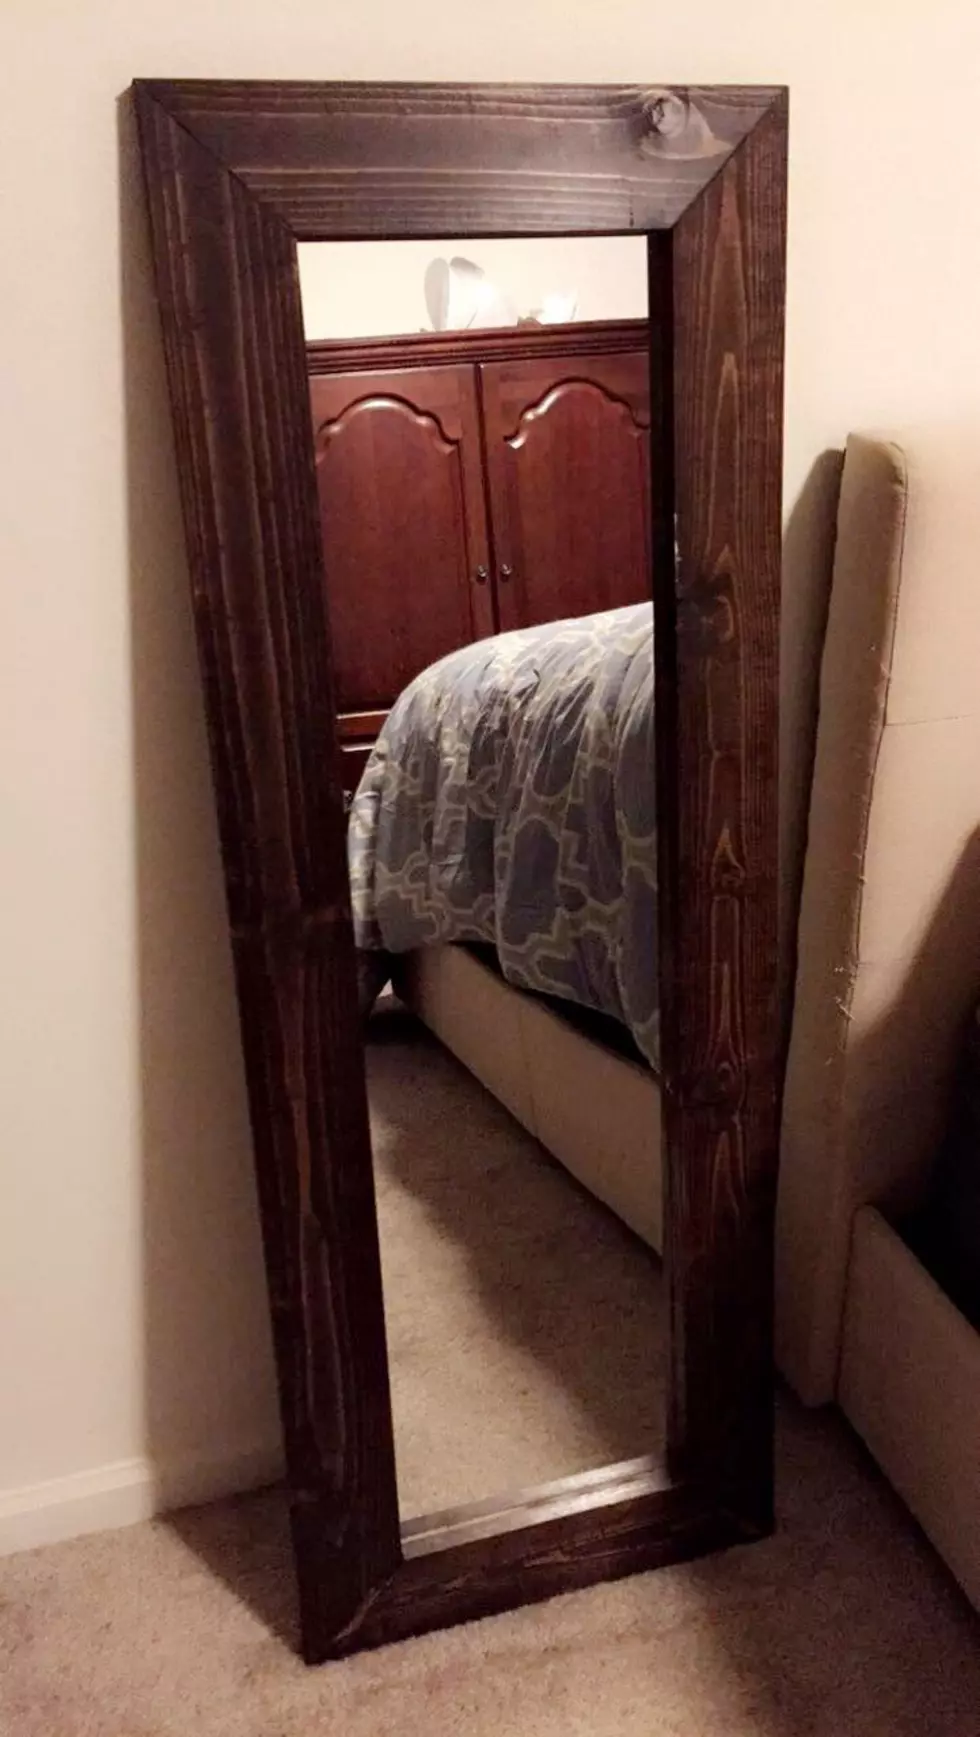 How To Turn A Cheap Mirror Into Rustic Beauty Part 2 – DIY On A Budget